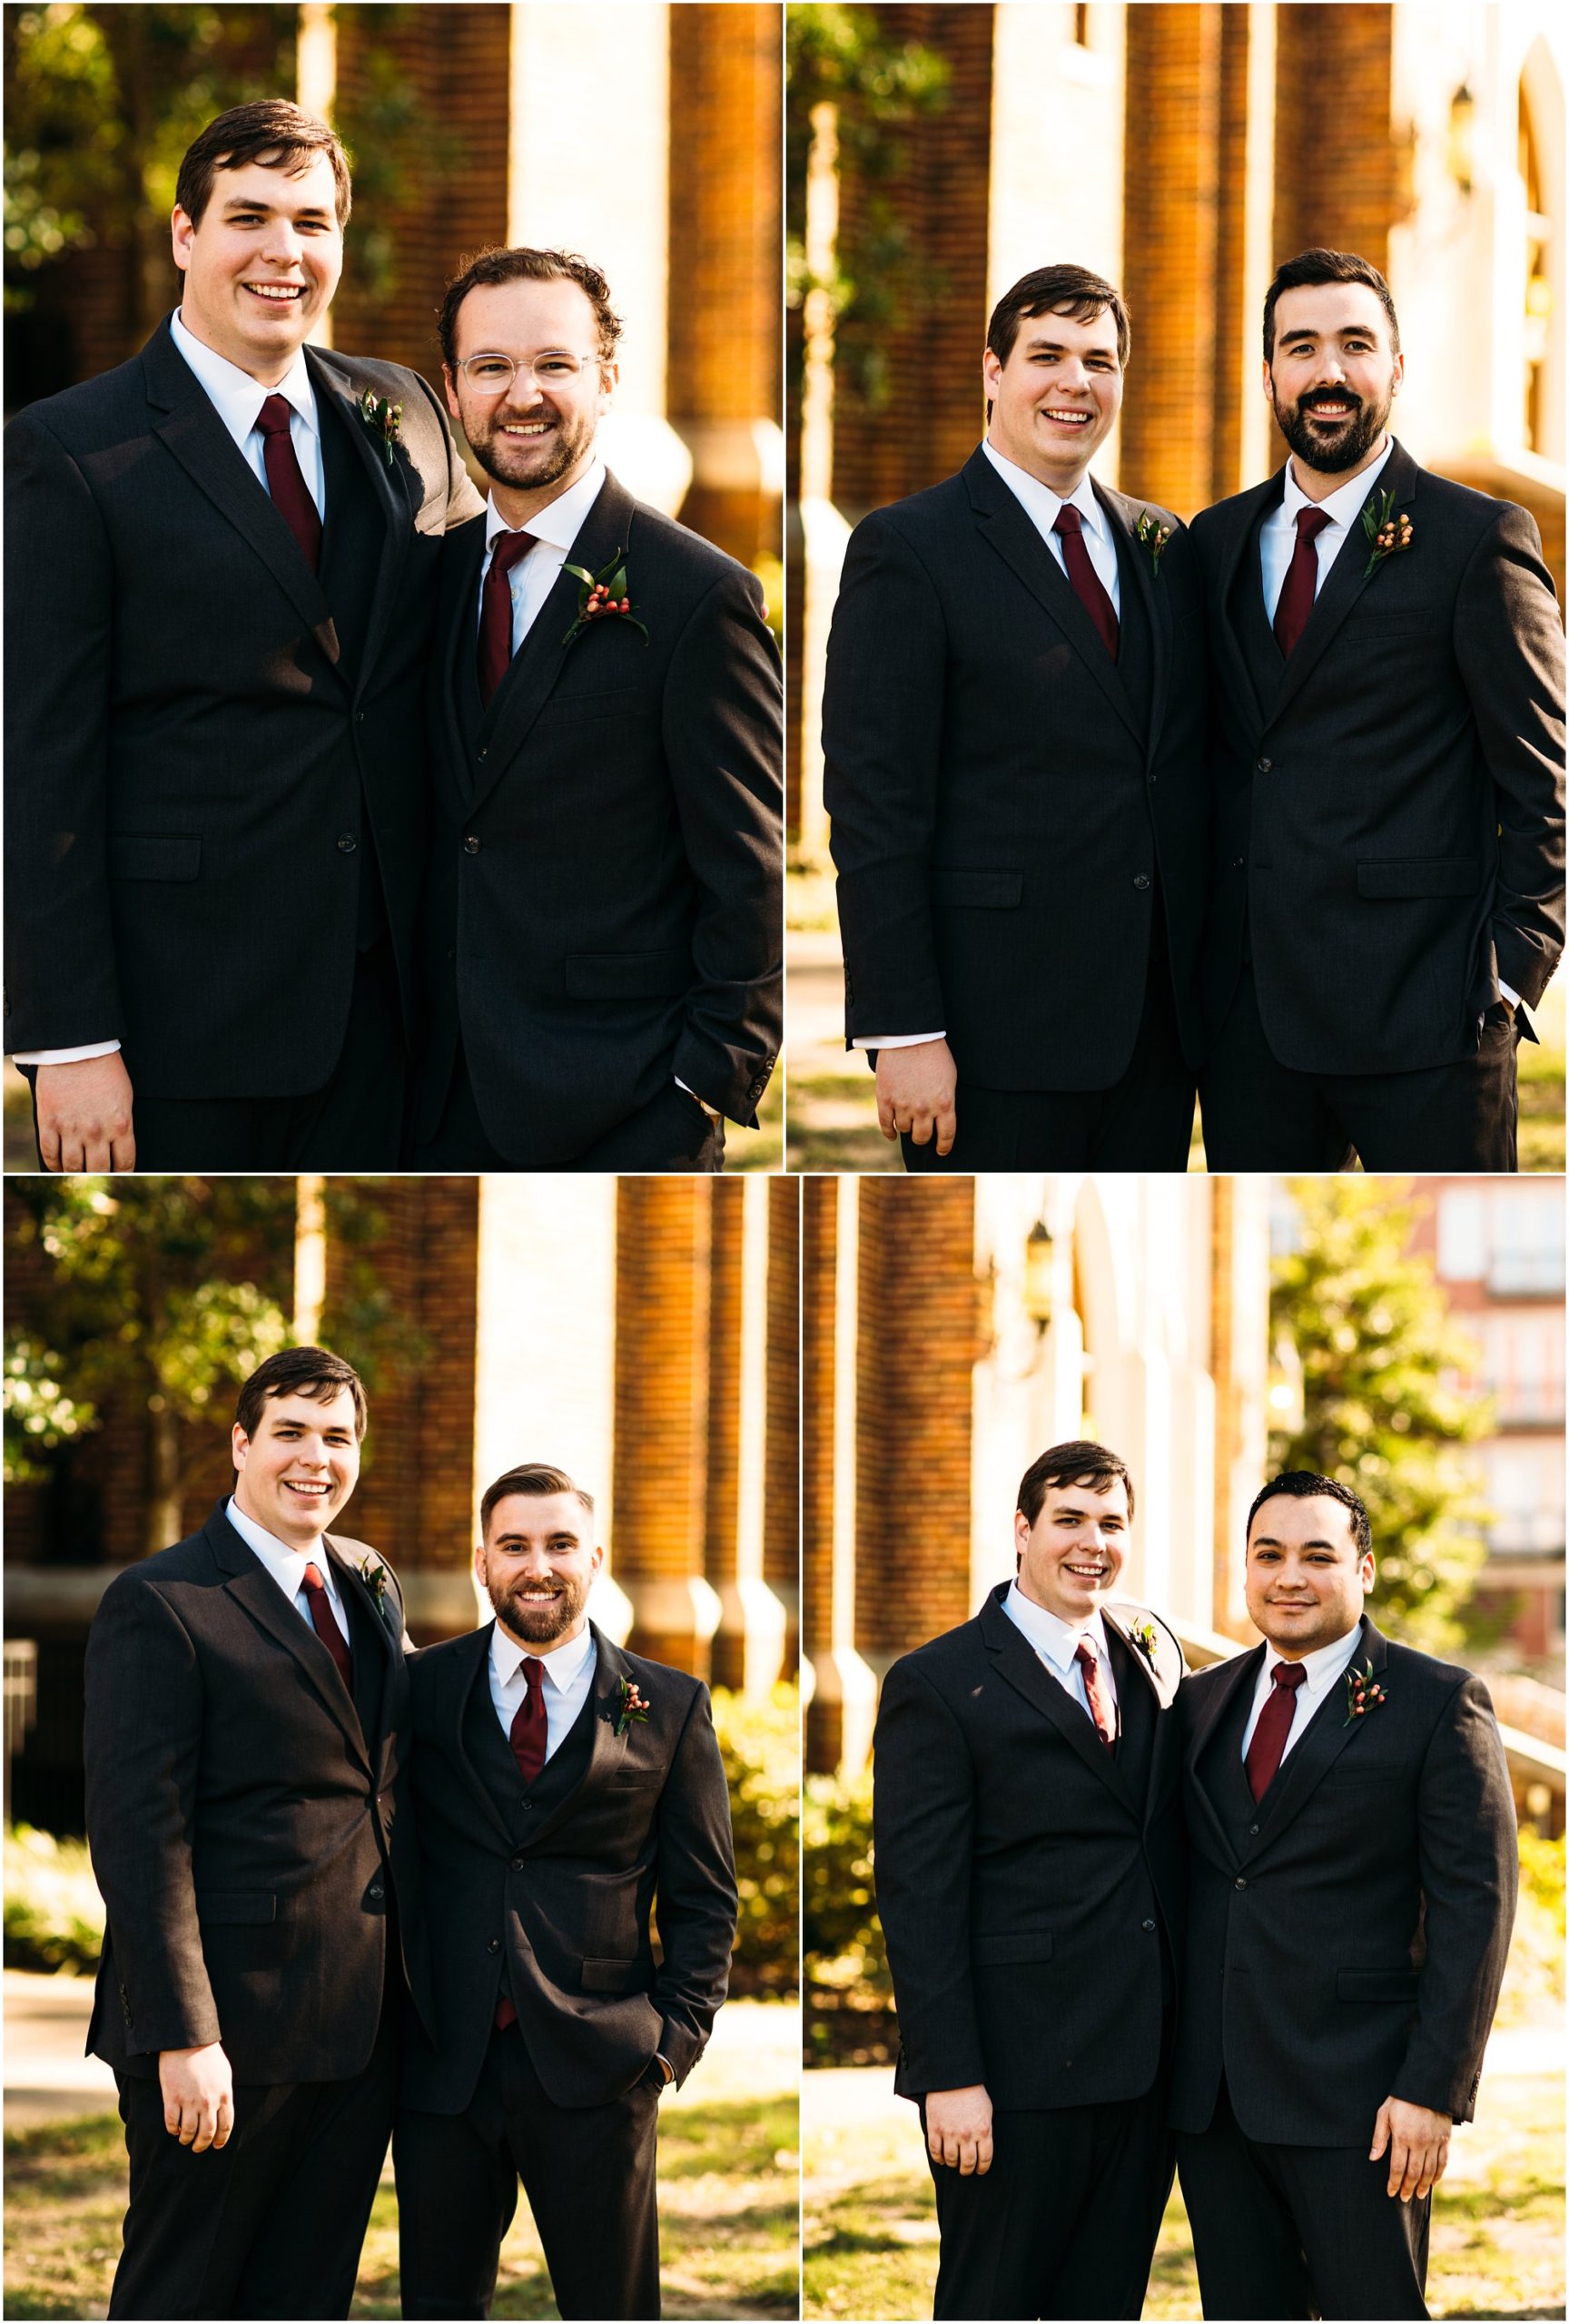 Groom posing with each of his groomsmen with historic church behind them